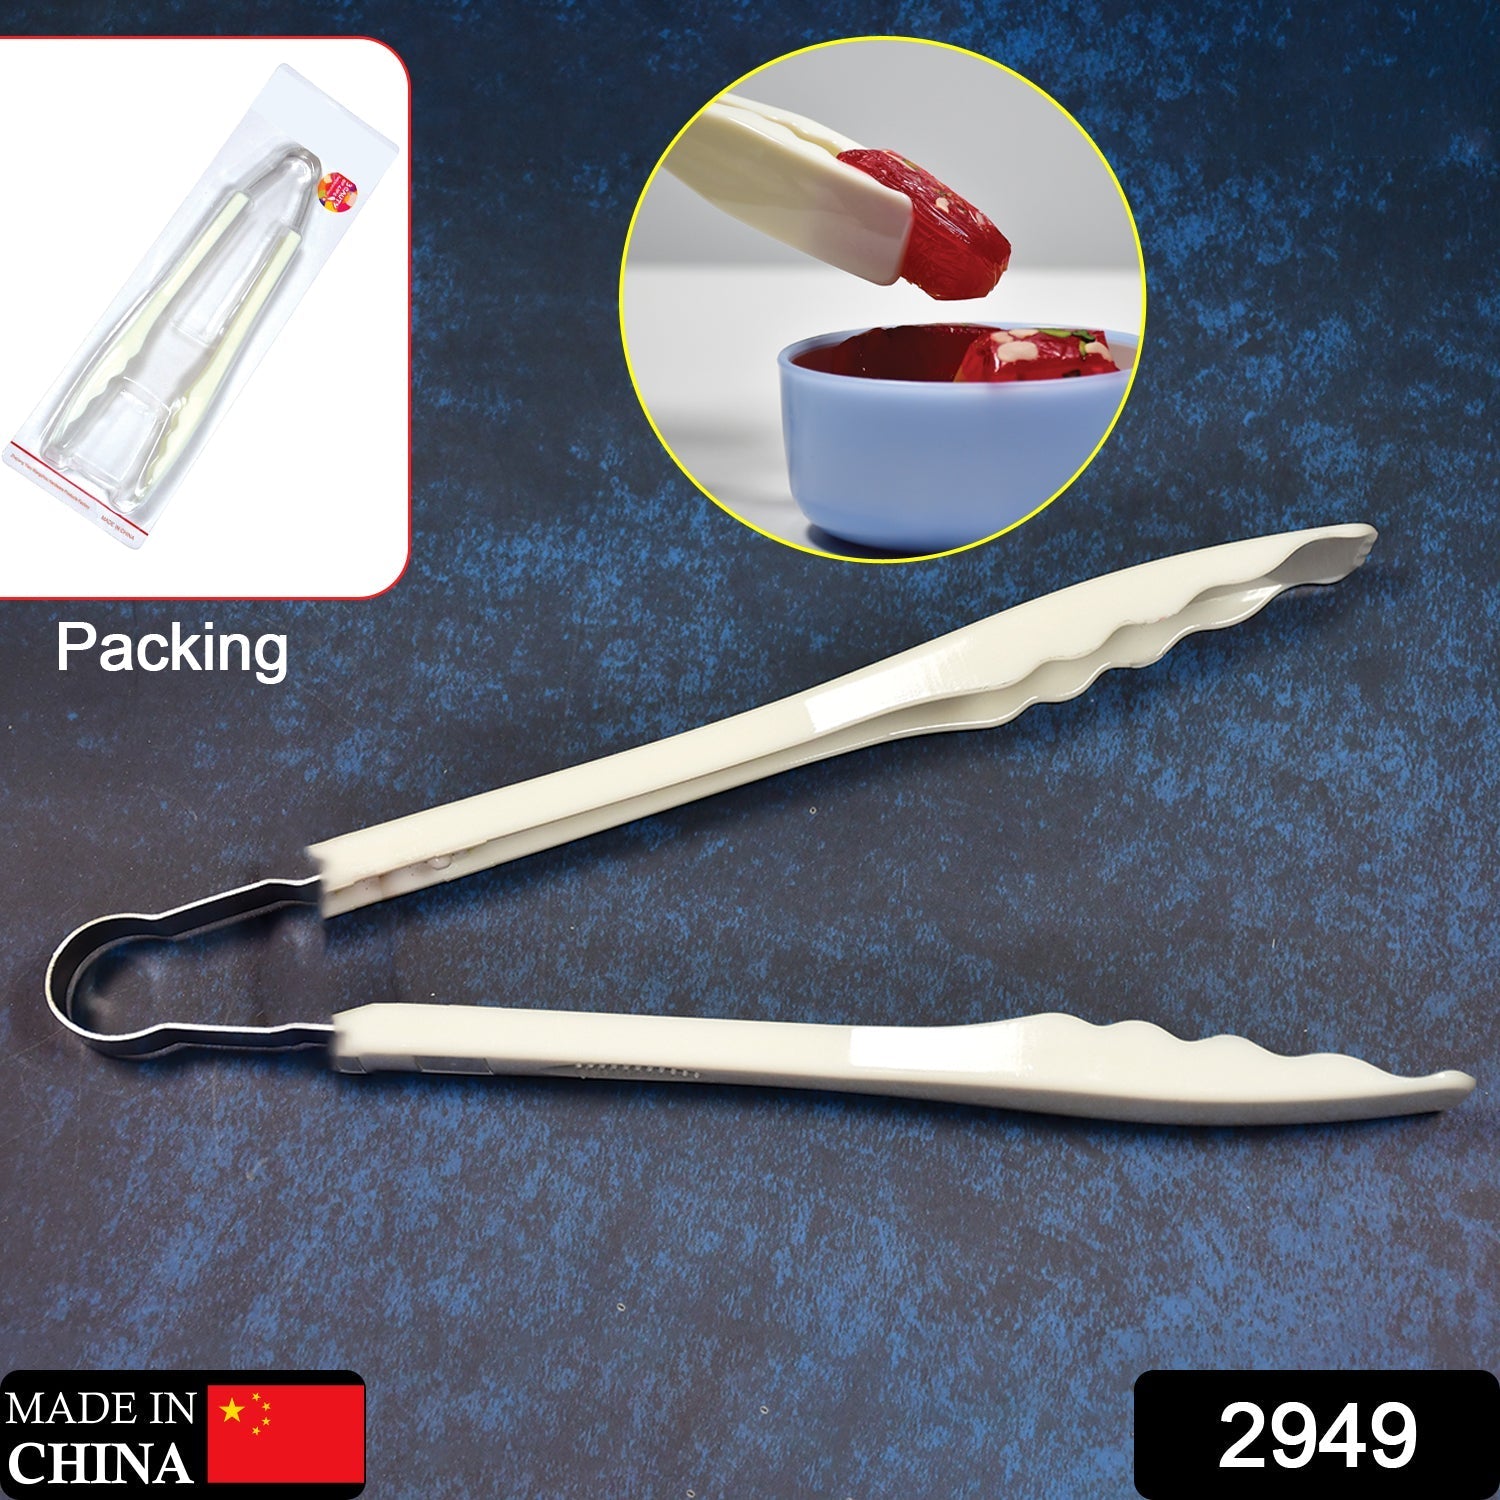 2949 Plastic Handle Tong, Bread Clamps, Kitchen Tongs Cooking Tongs.